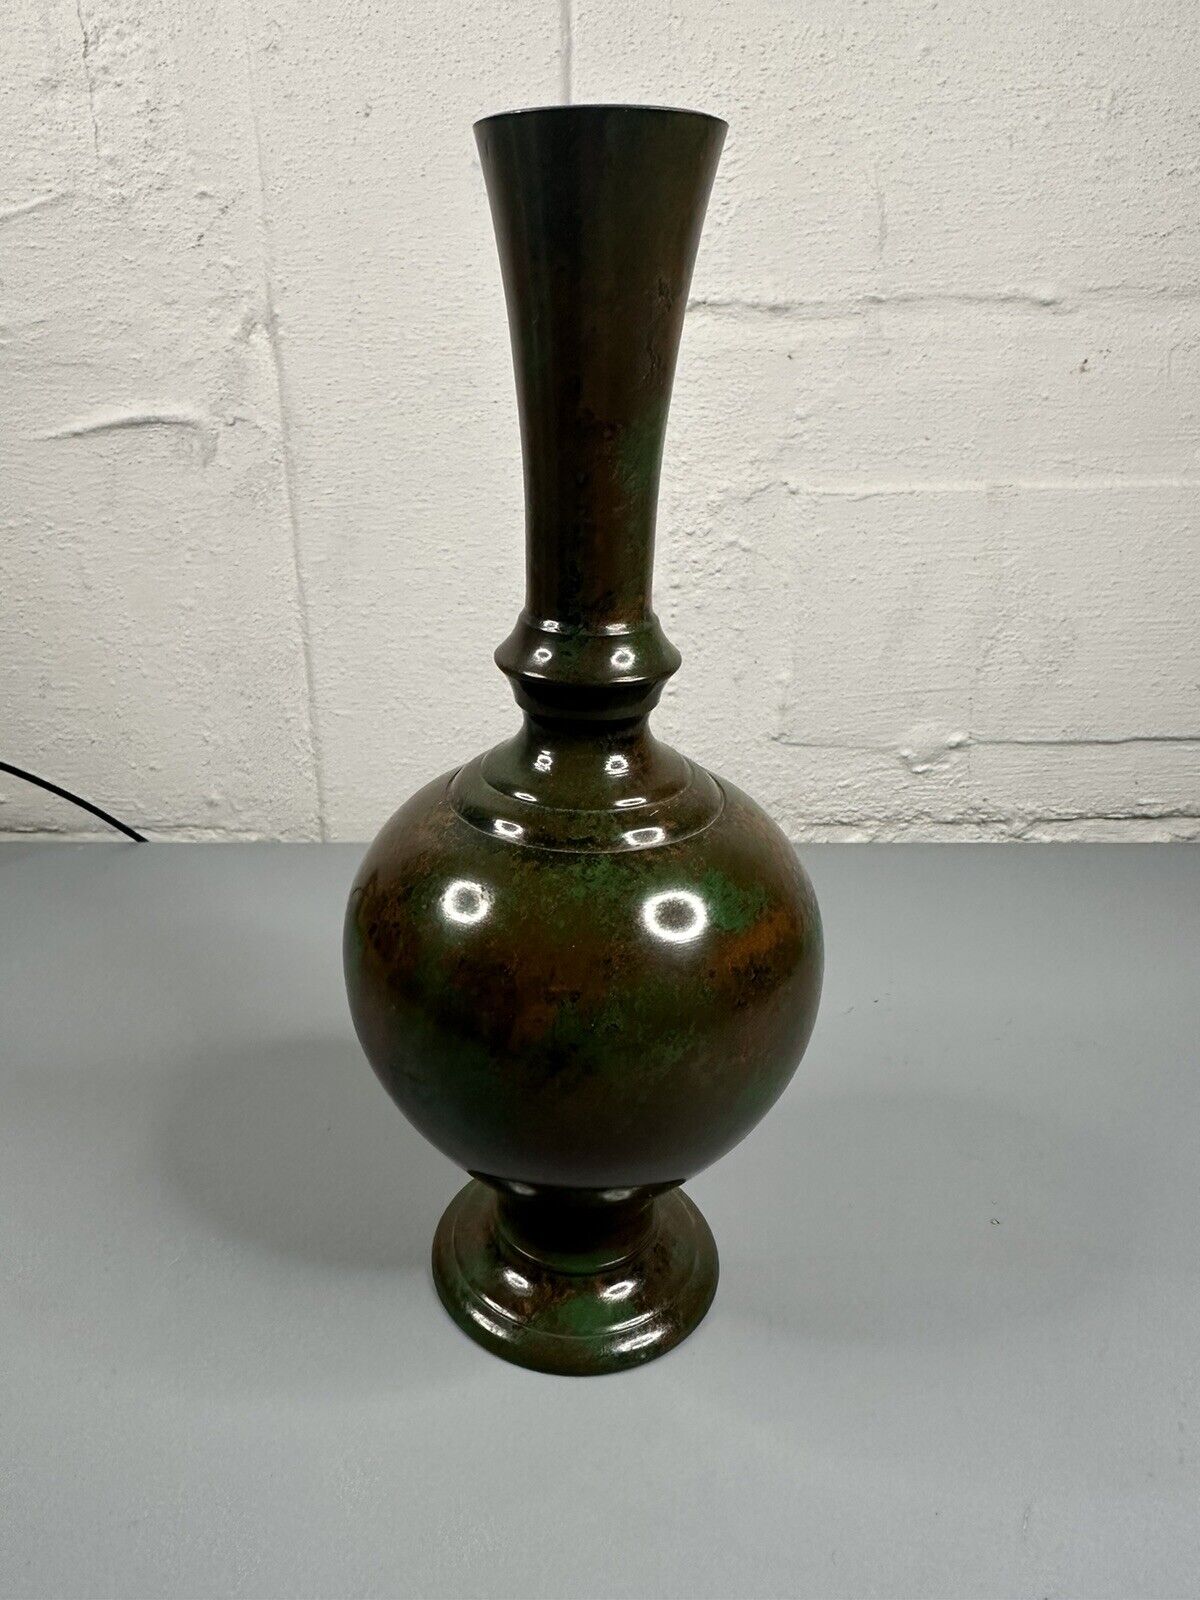 Vintage Japanese Patinated Bronze 9” Inch Tall Vase 3.5” Wide